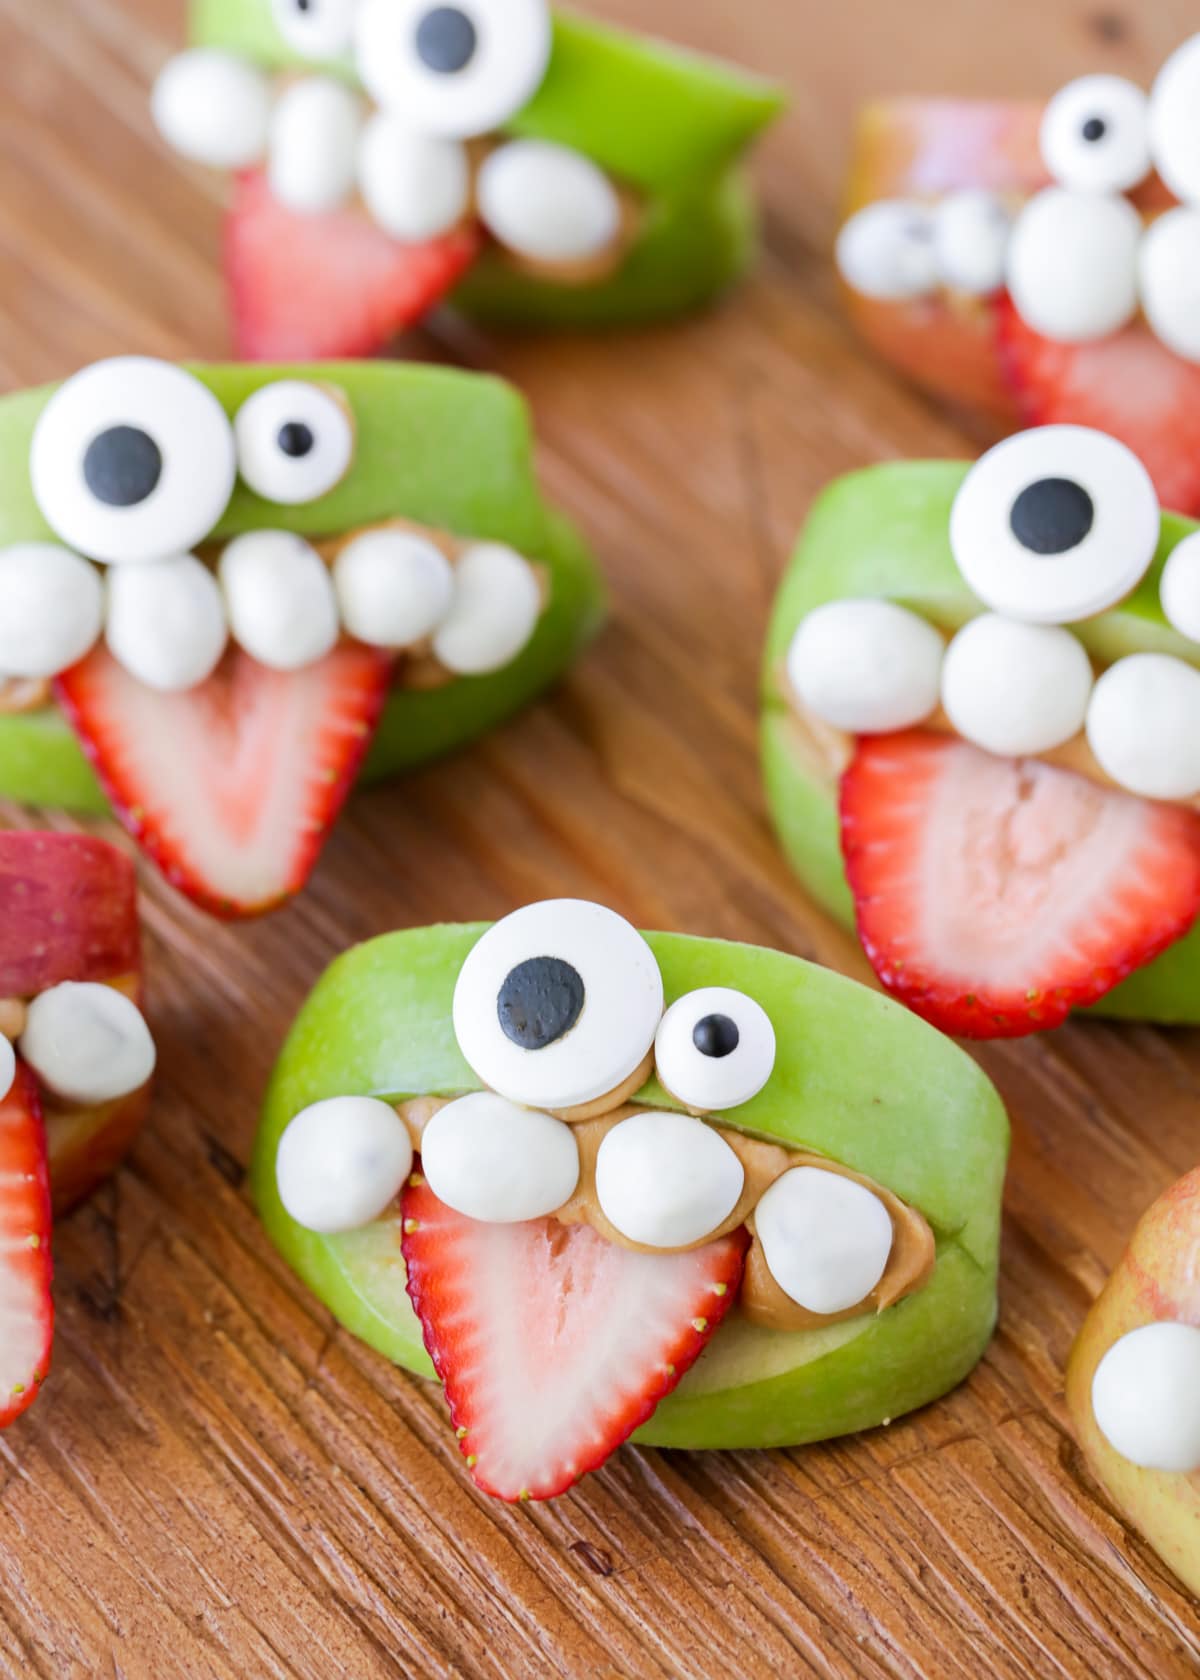 A close up of several apple monster teeth with strawberry tongues.